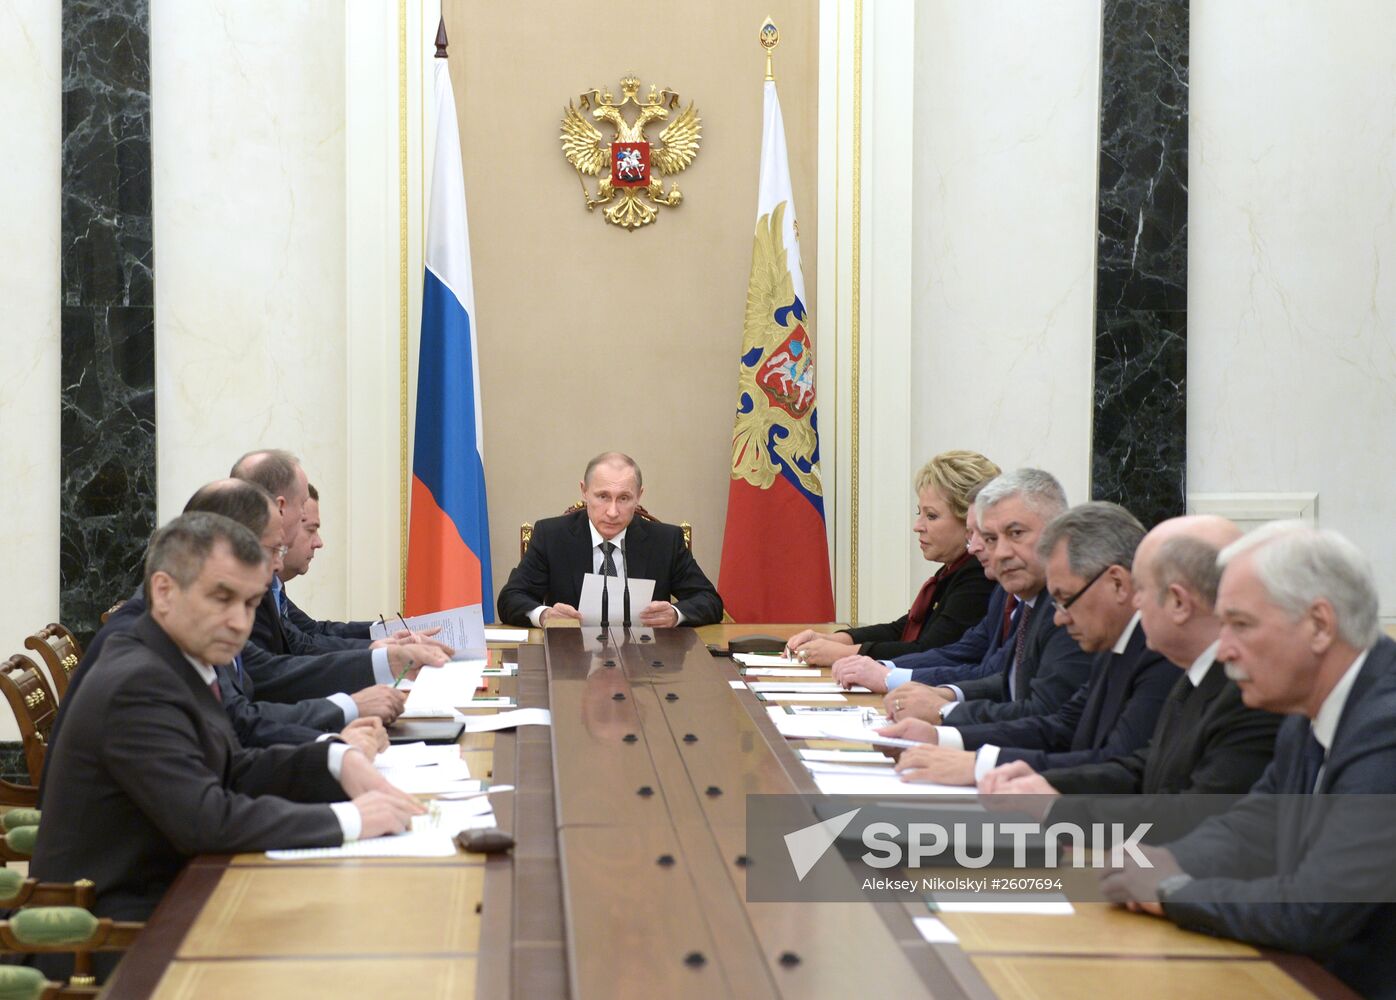 President Putin holds meeting with Russian Security Council permanent members